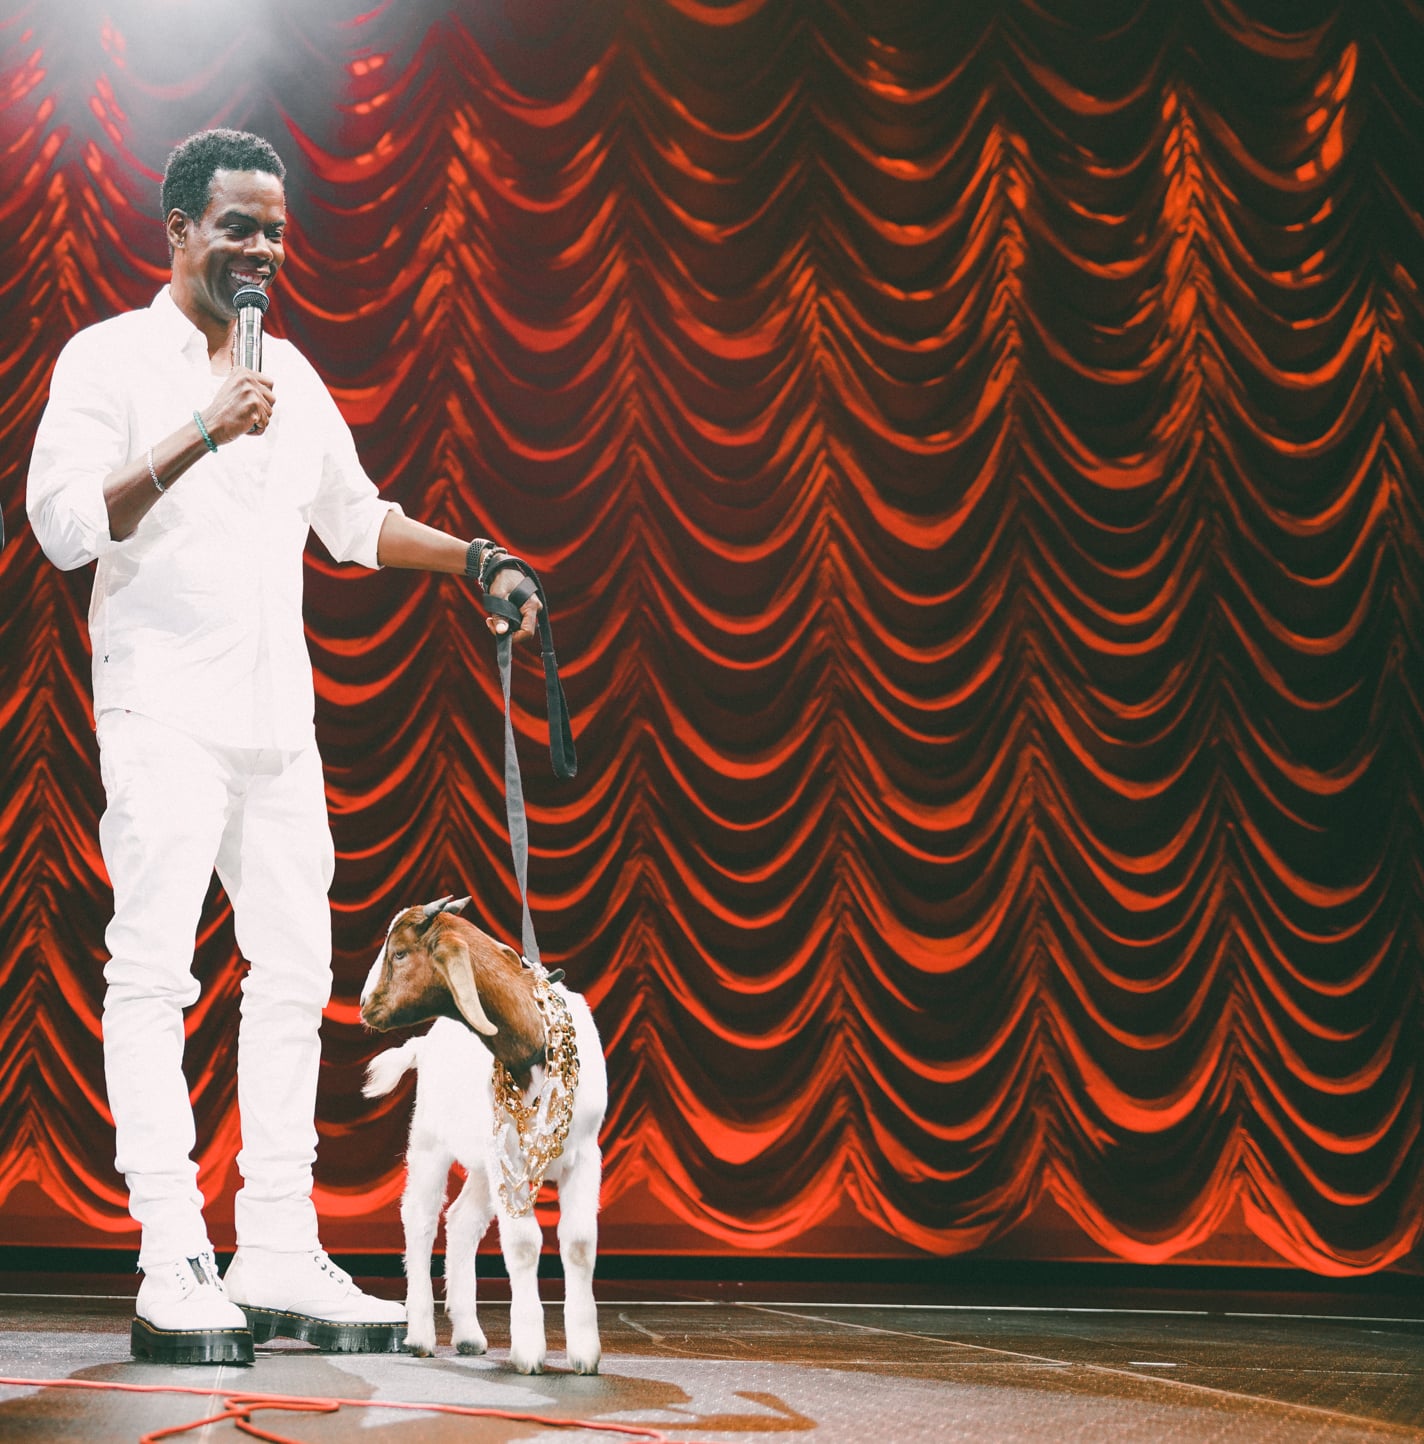 Chris Rock performing standup on stage.